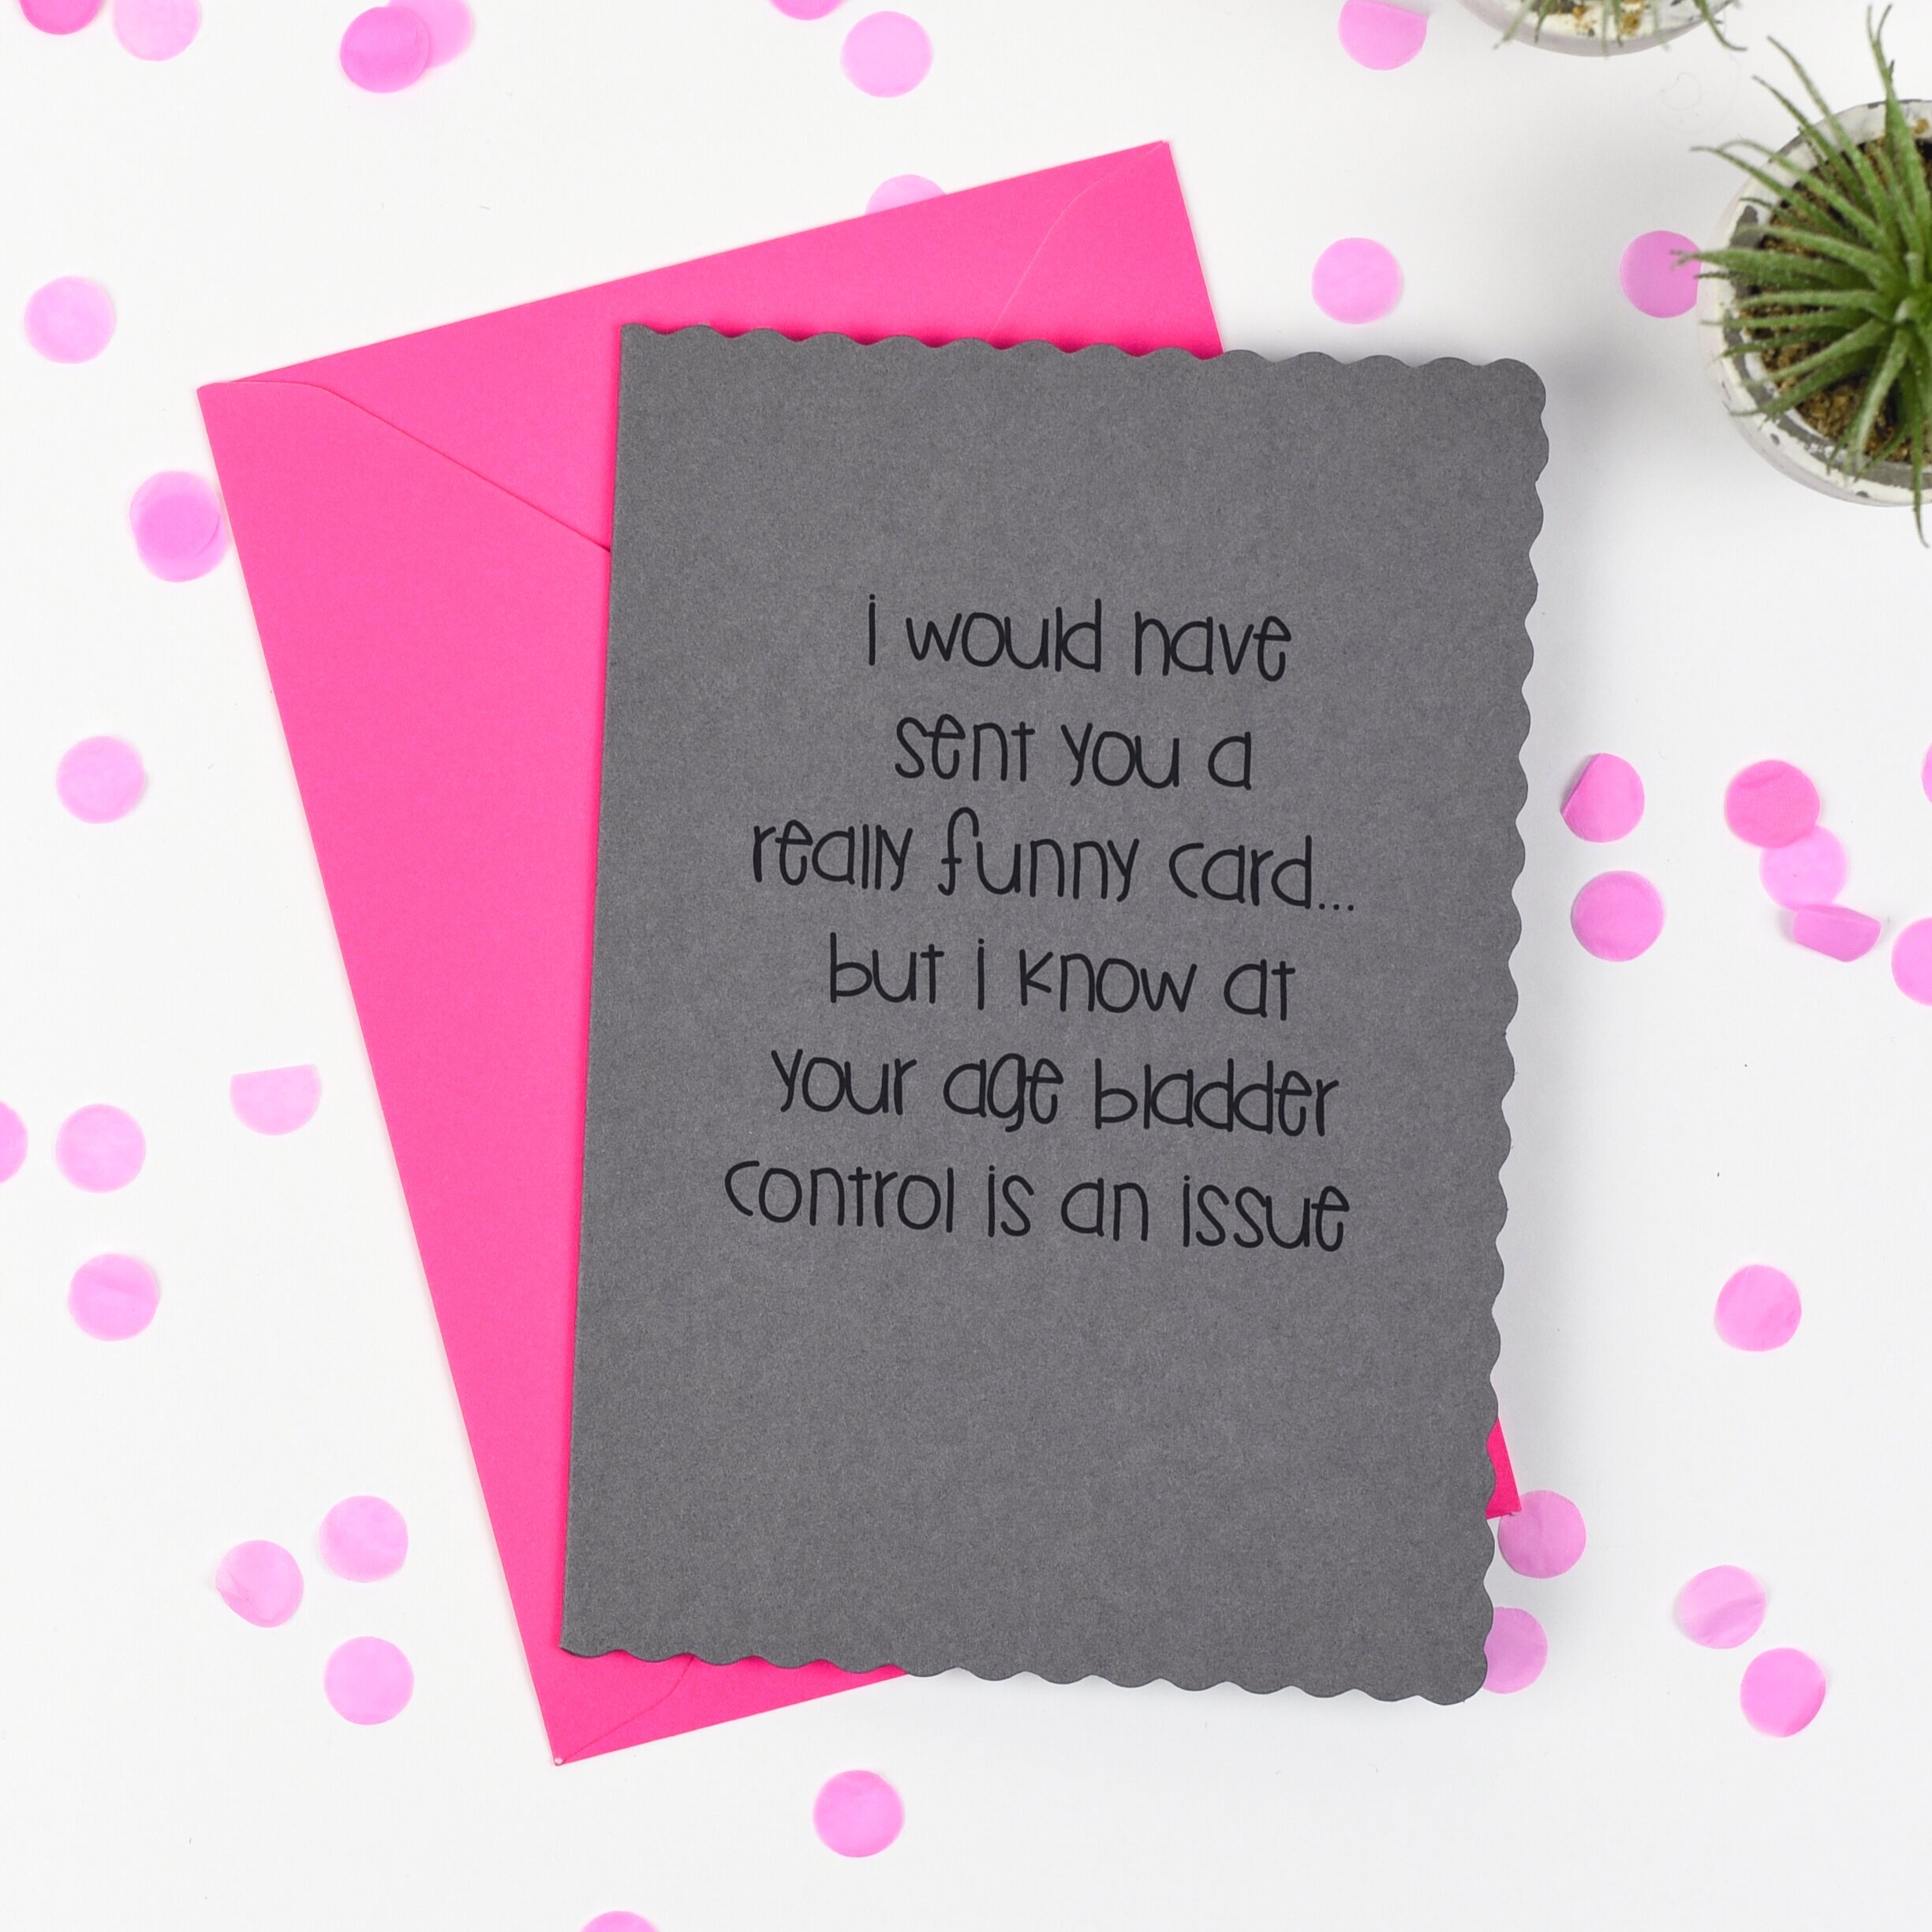 I would have got you a funny card but I know bladder control can be a problem. 